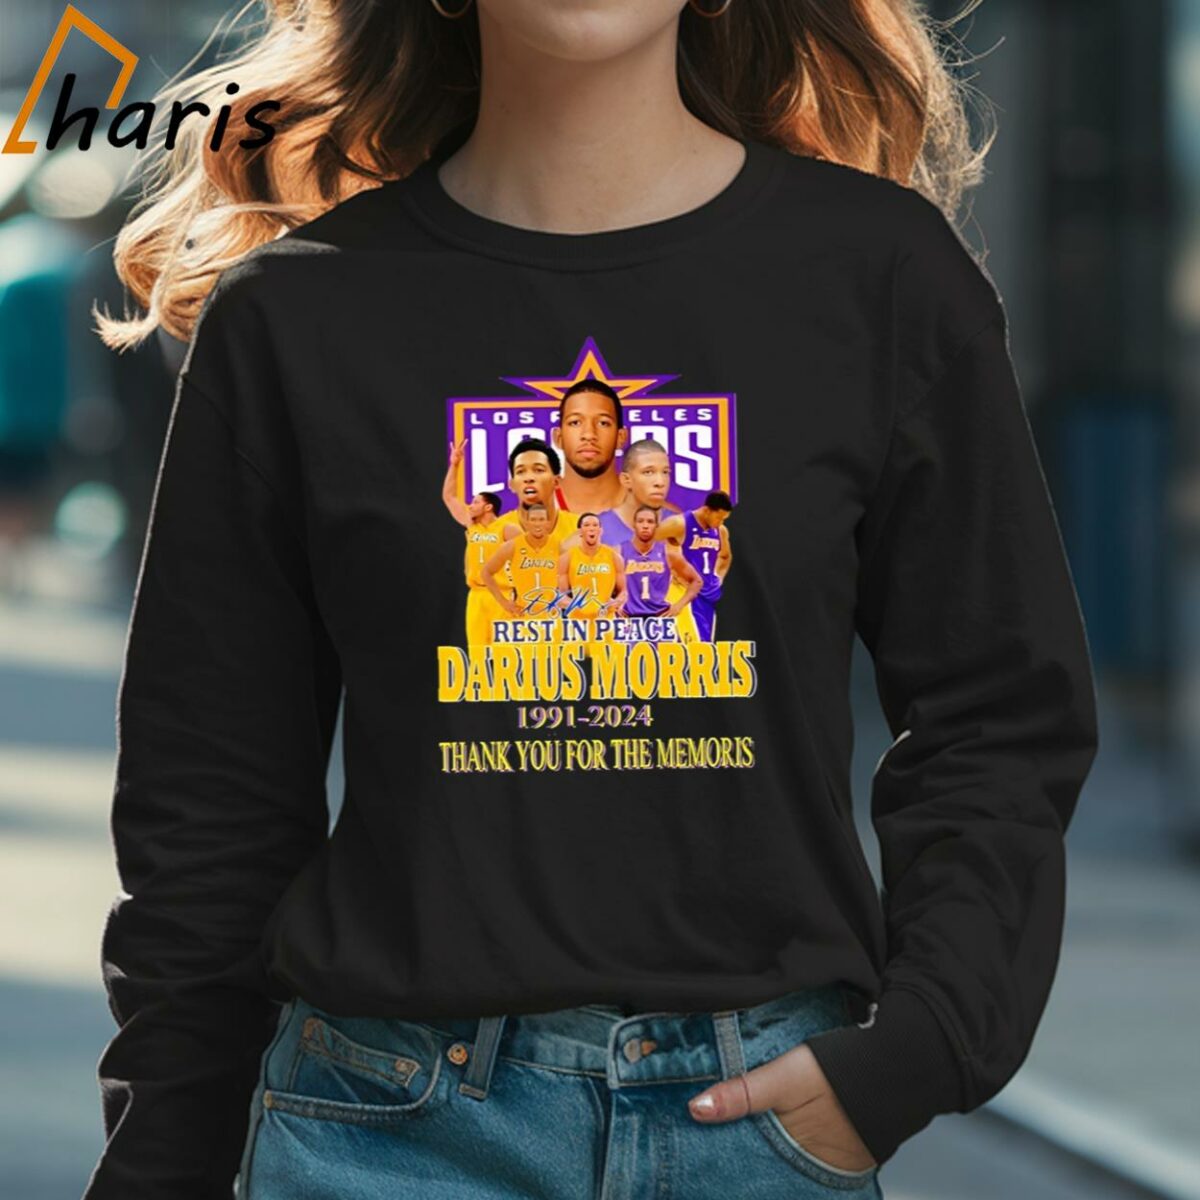 Rest In Peace Darius Morris 1991 2024 Thank You For The Memories T Shirt 3 Long sleeve shirt